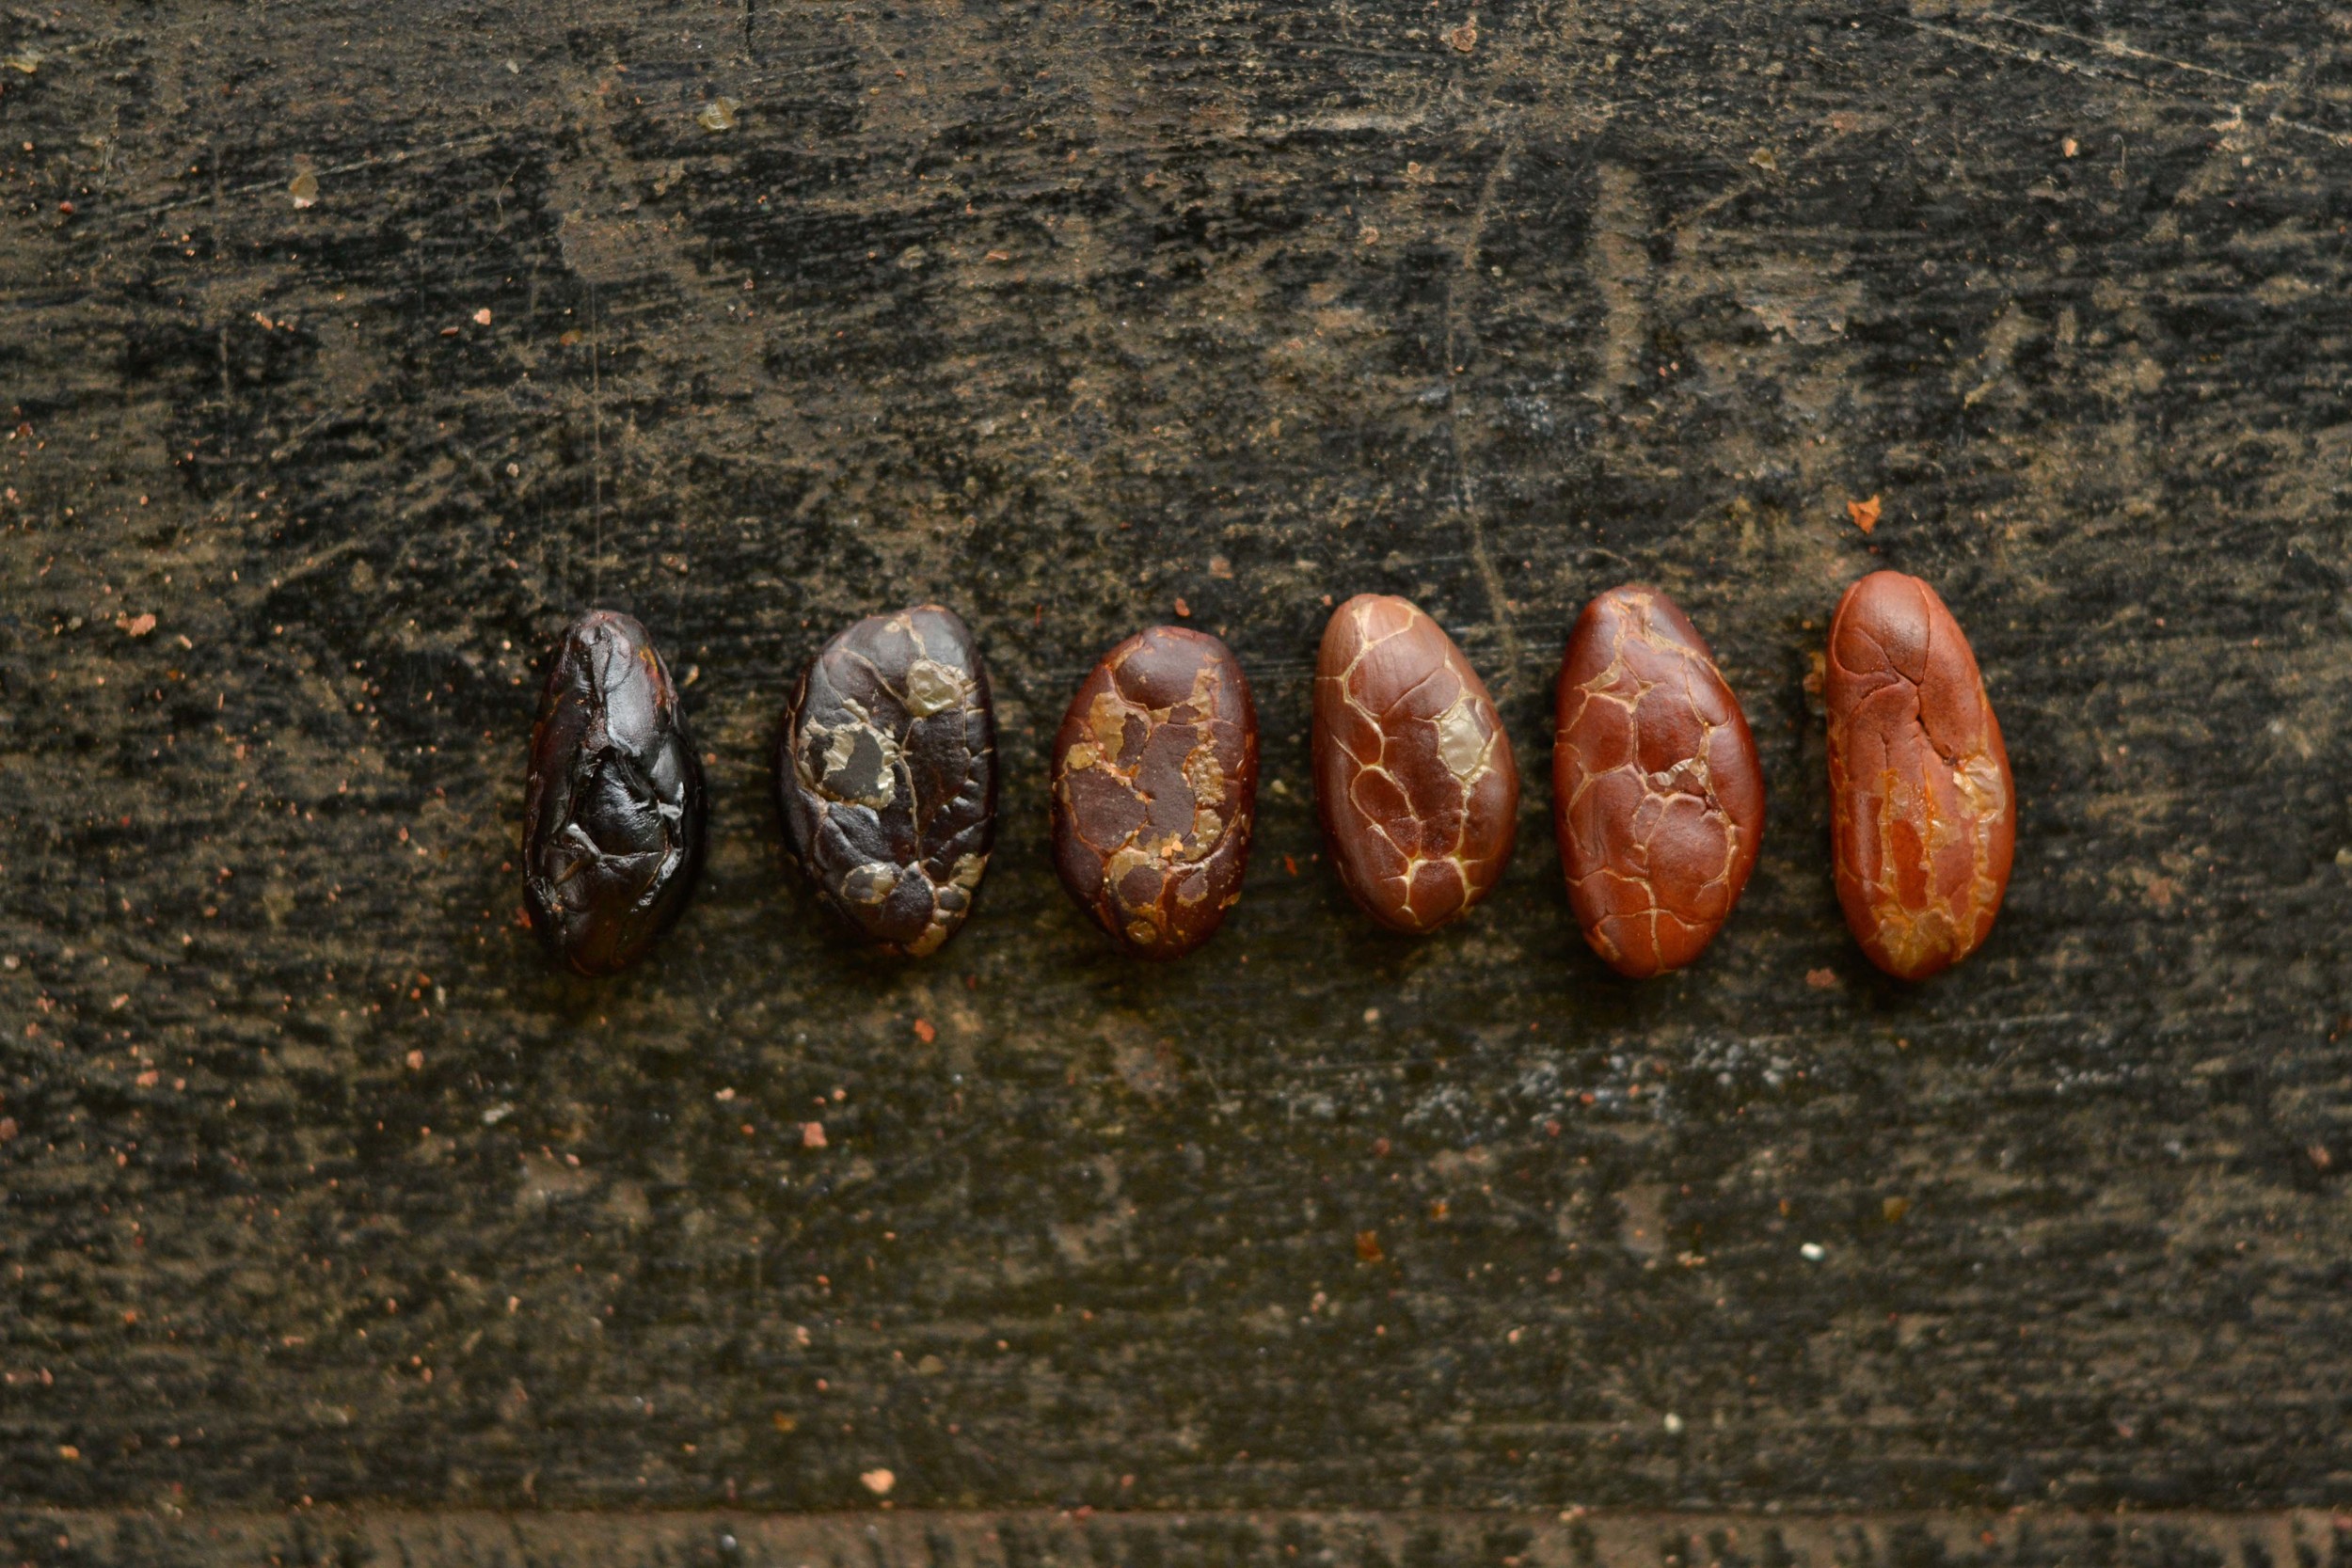  The spectrum of cacao colors is due to different types of cacao and varying fermentation durations 